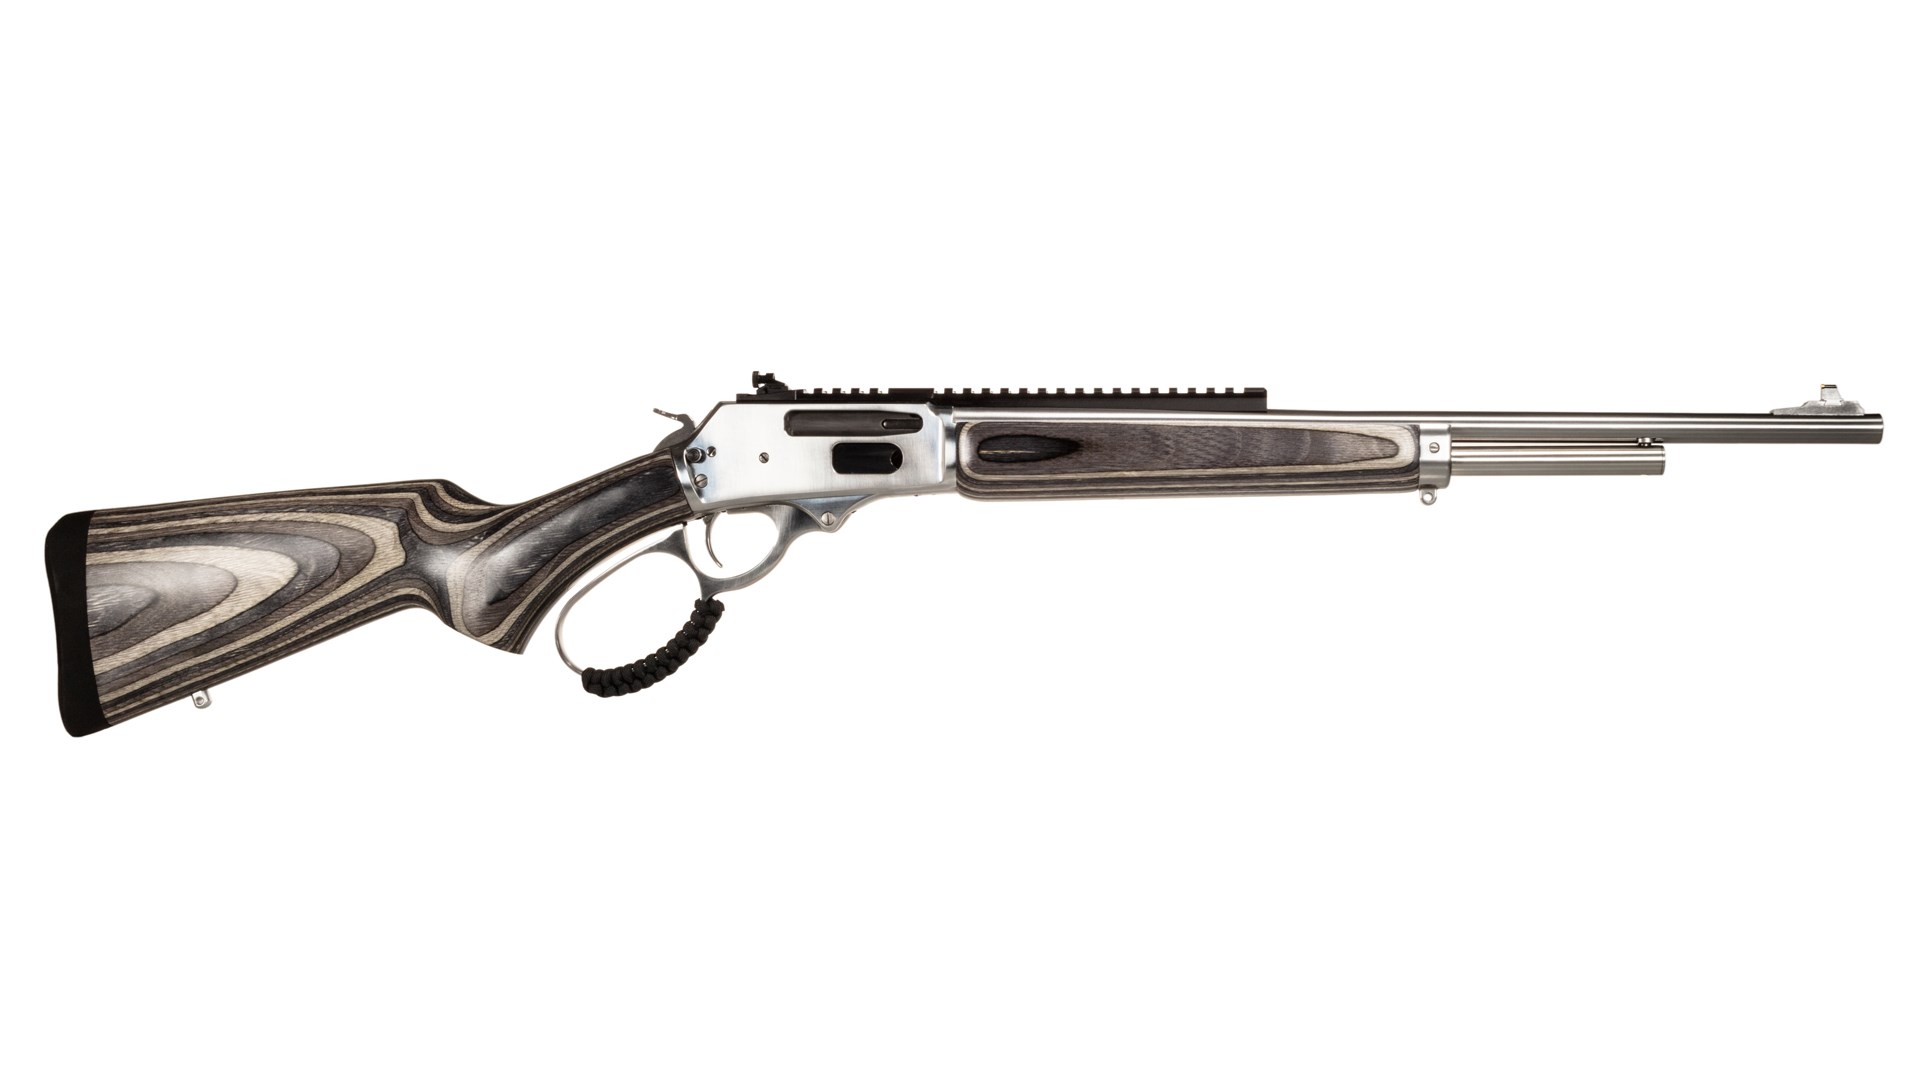 Right side of the Rossi R95 Stainless Steel rifle.